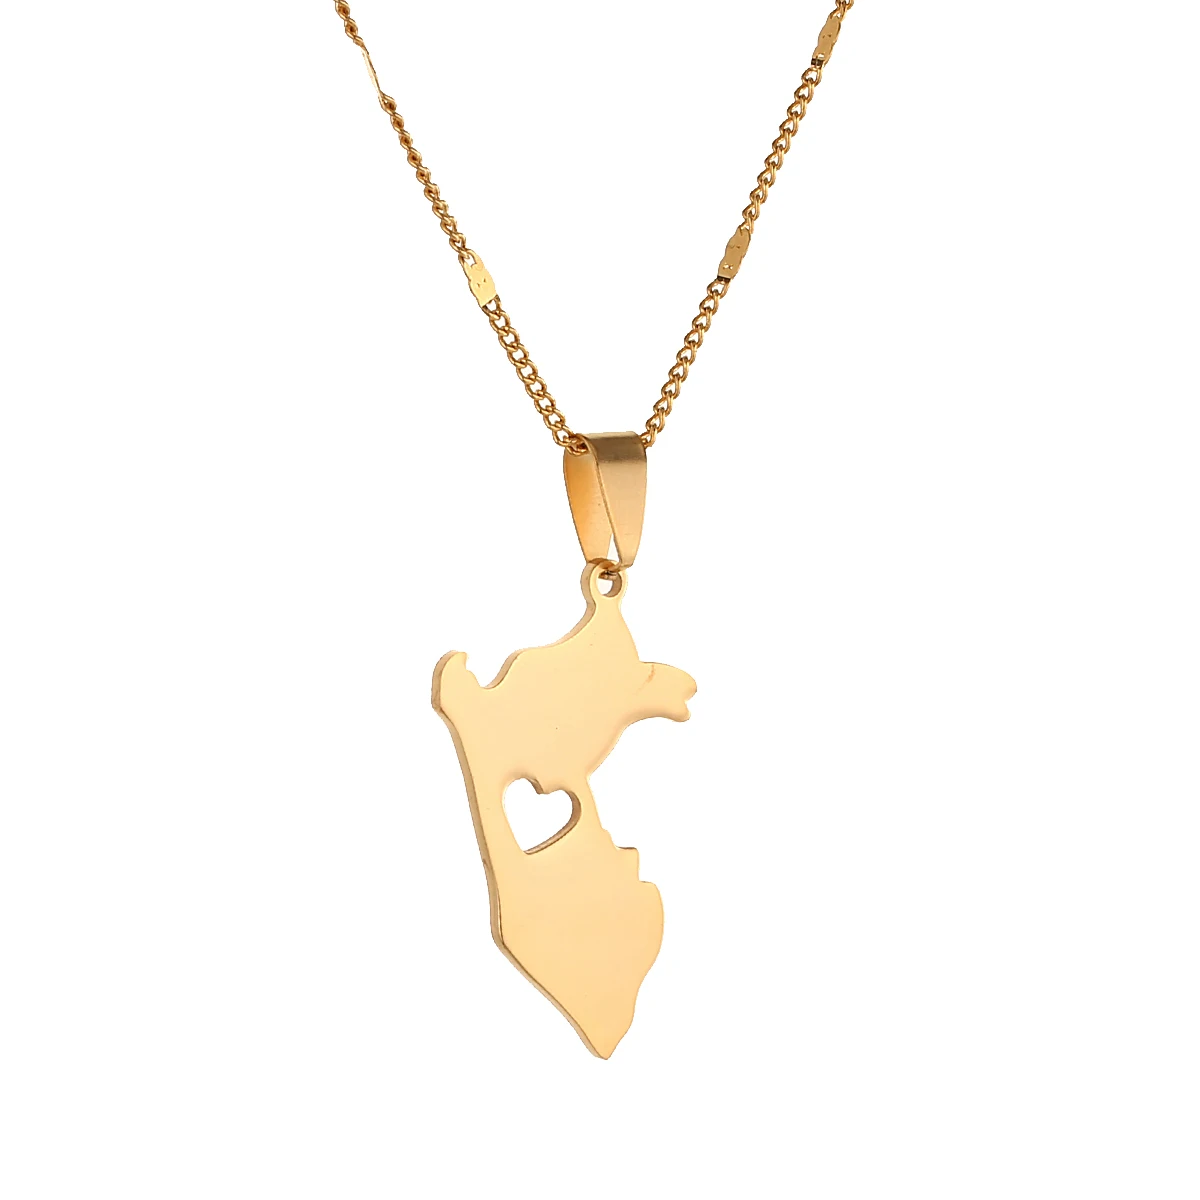 Stainless Steel Peru Map Pendant Necklaces Map Of Peru Heart Chain Jewelry